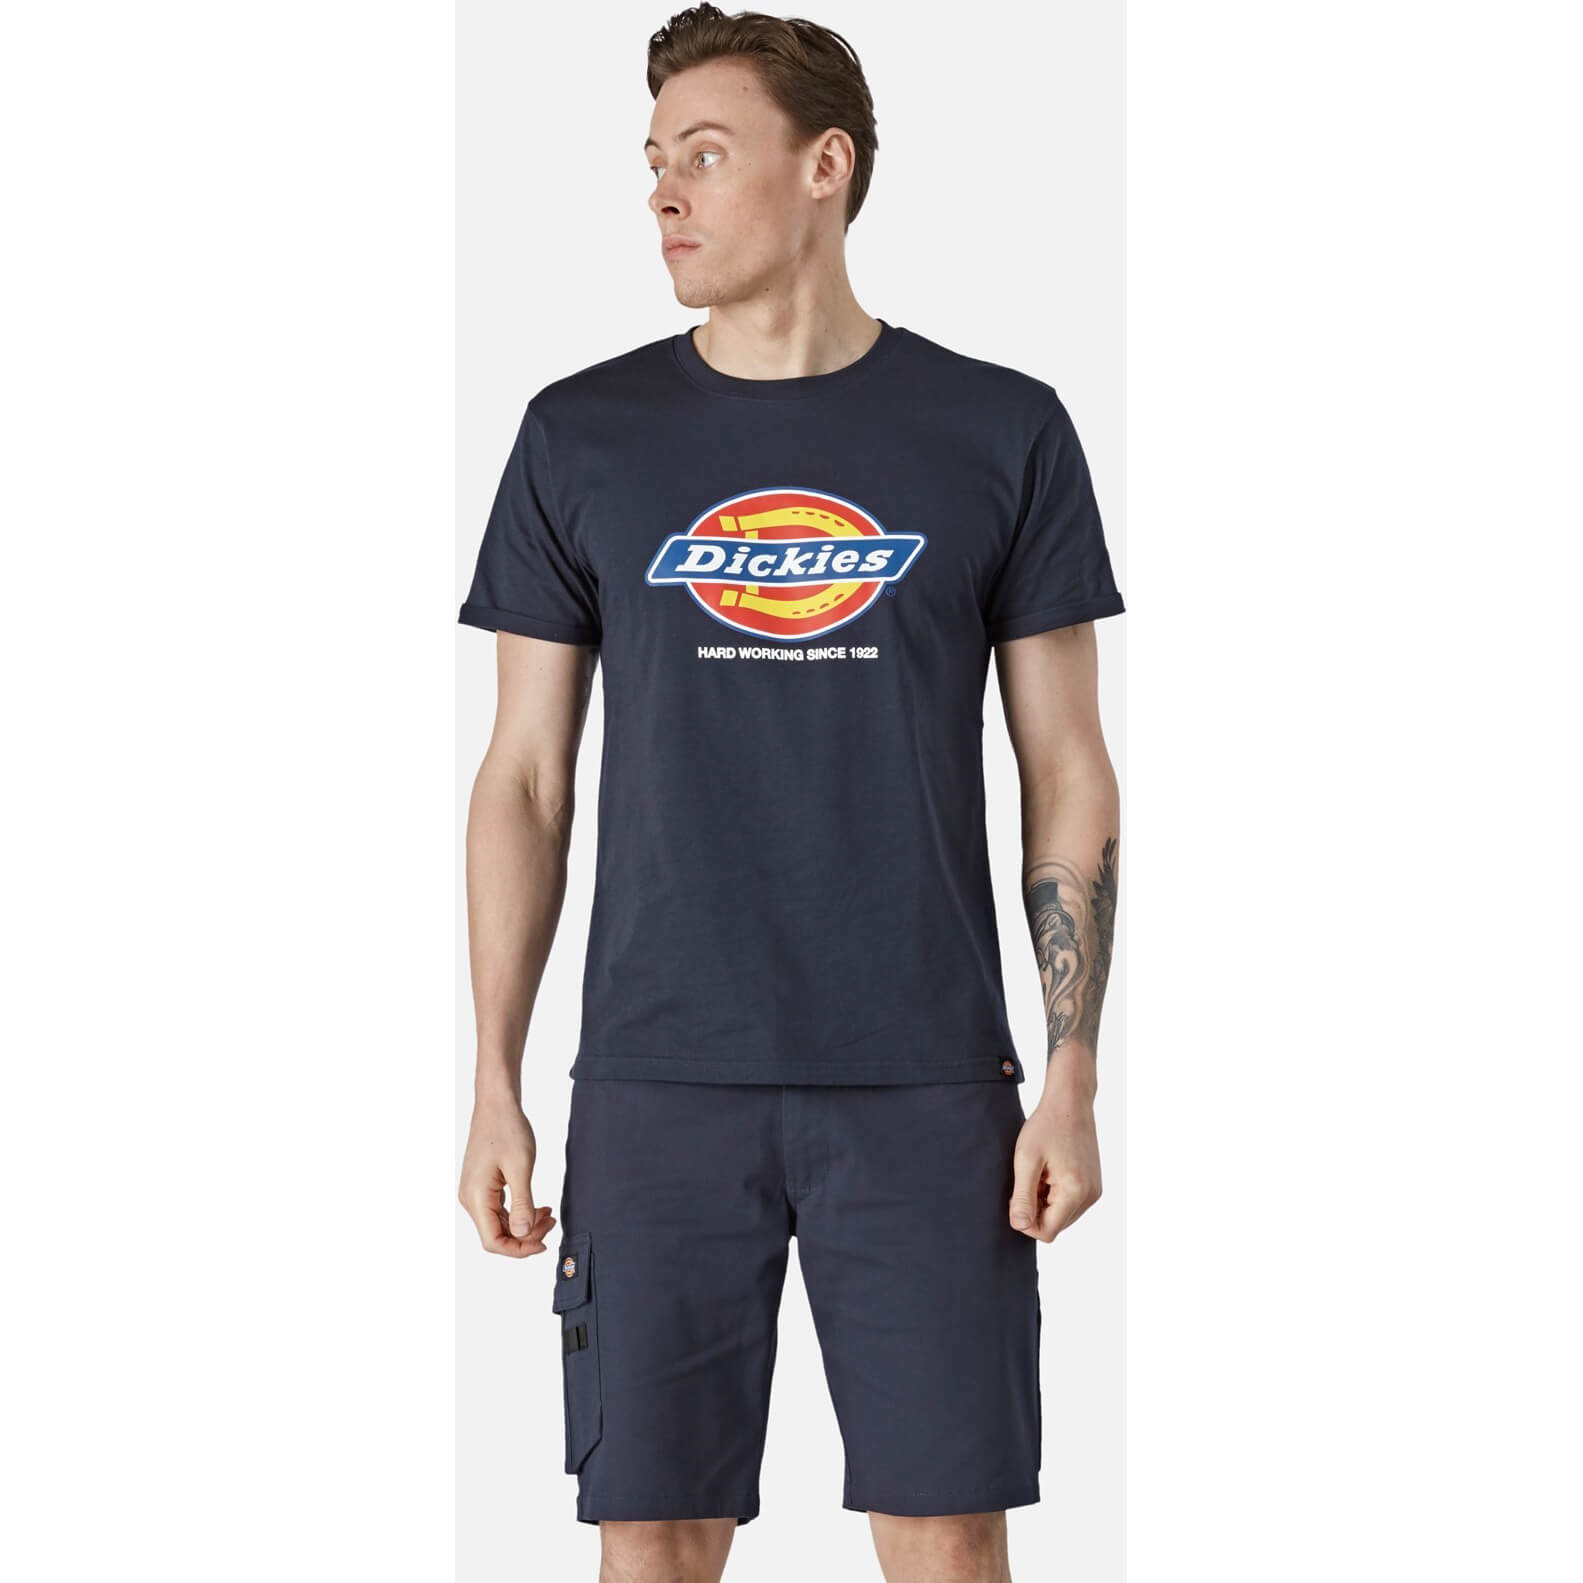 Image of Dickies Denison T Shirt Navy Blue L